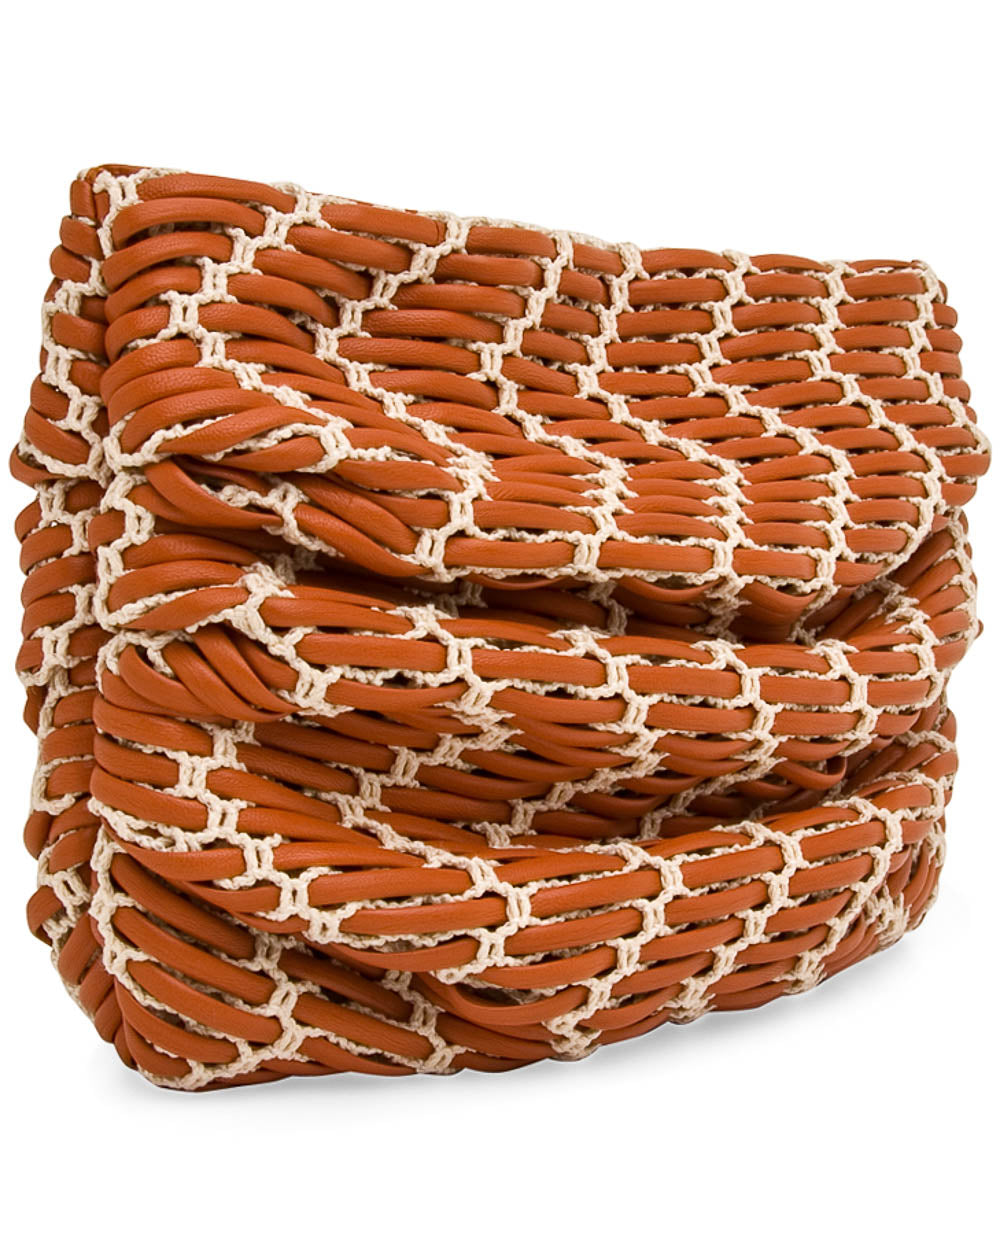 Abby Soft Ruched Clutch in Brick